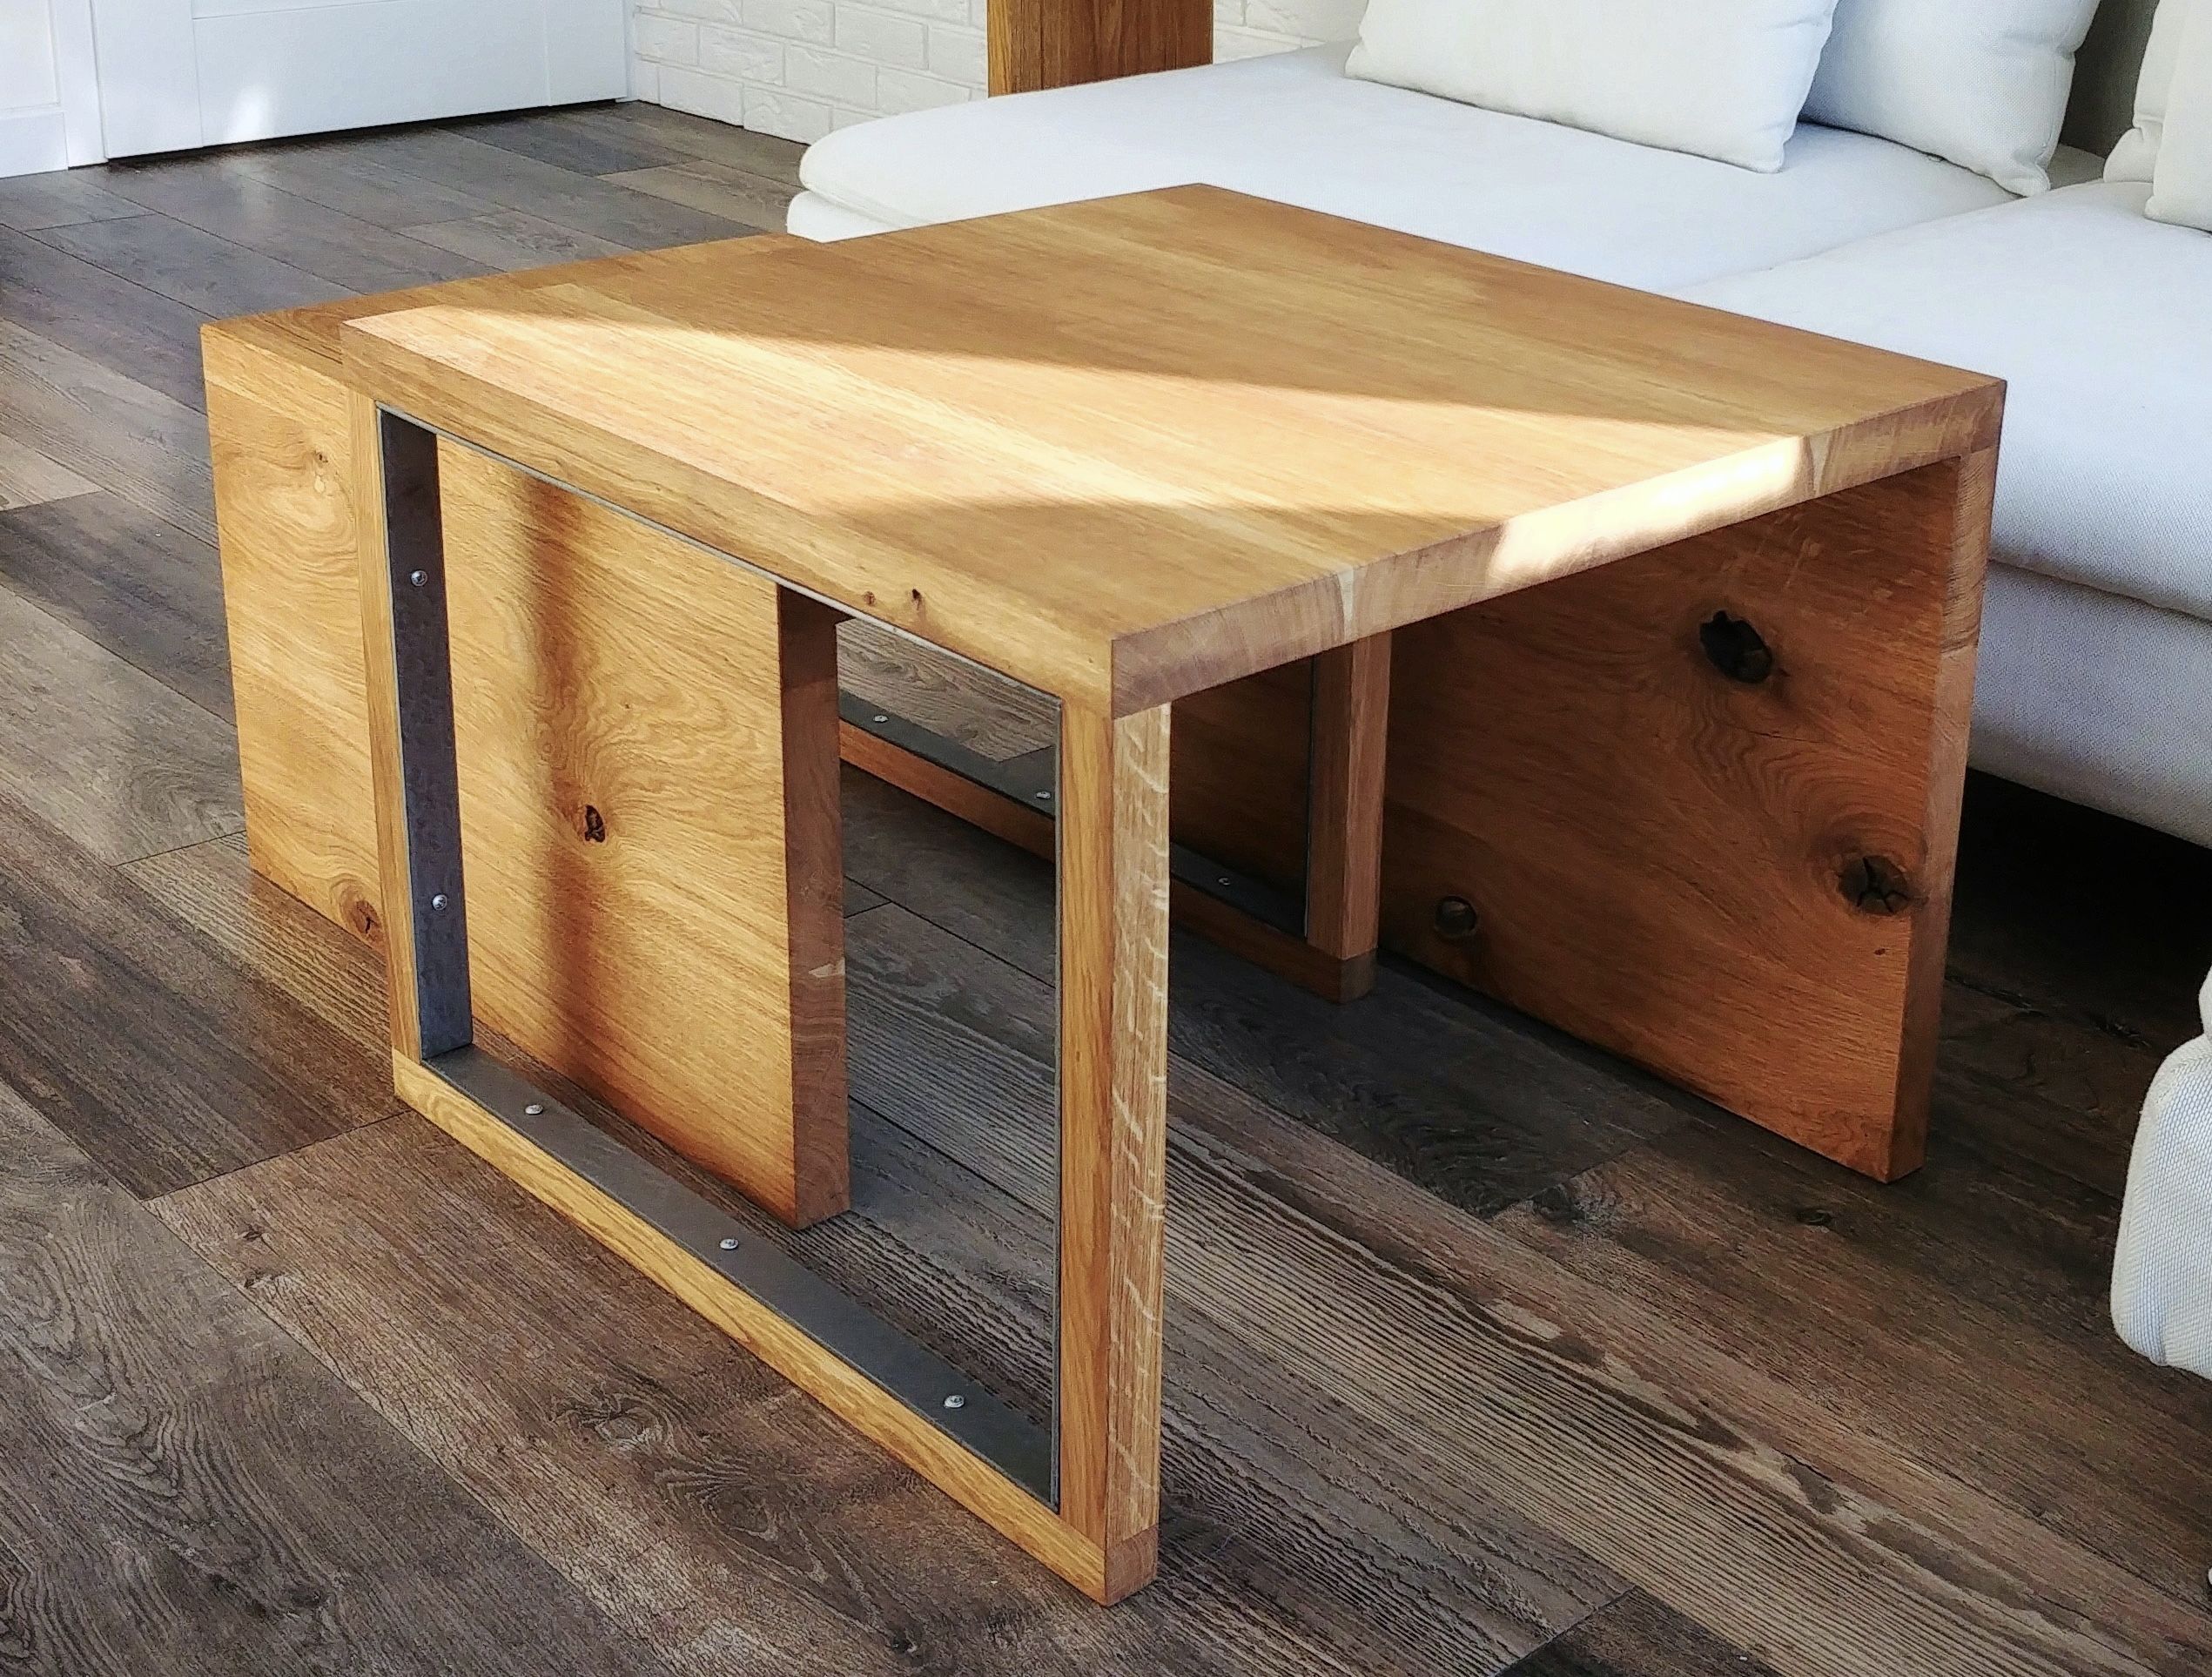 Solid Oak Wood Coffee Table With Steel Frame | Coffee Pertaining To Metal And Oak Coffee Tables (View 12 of 15)